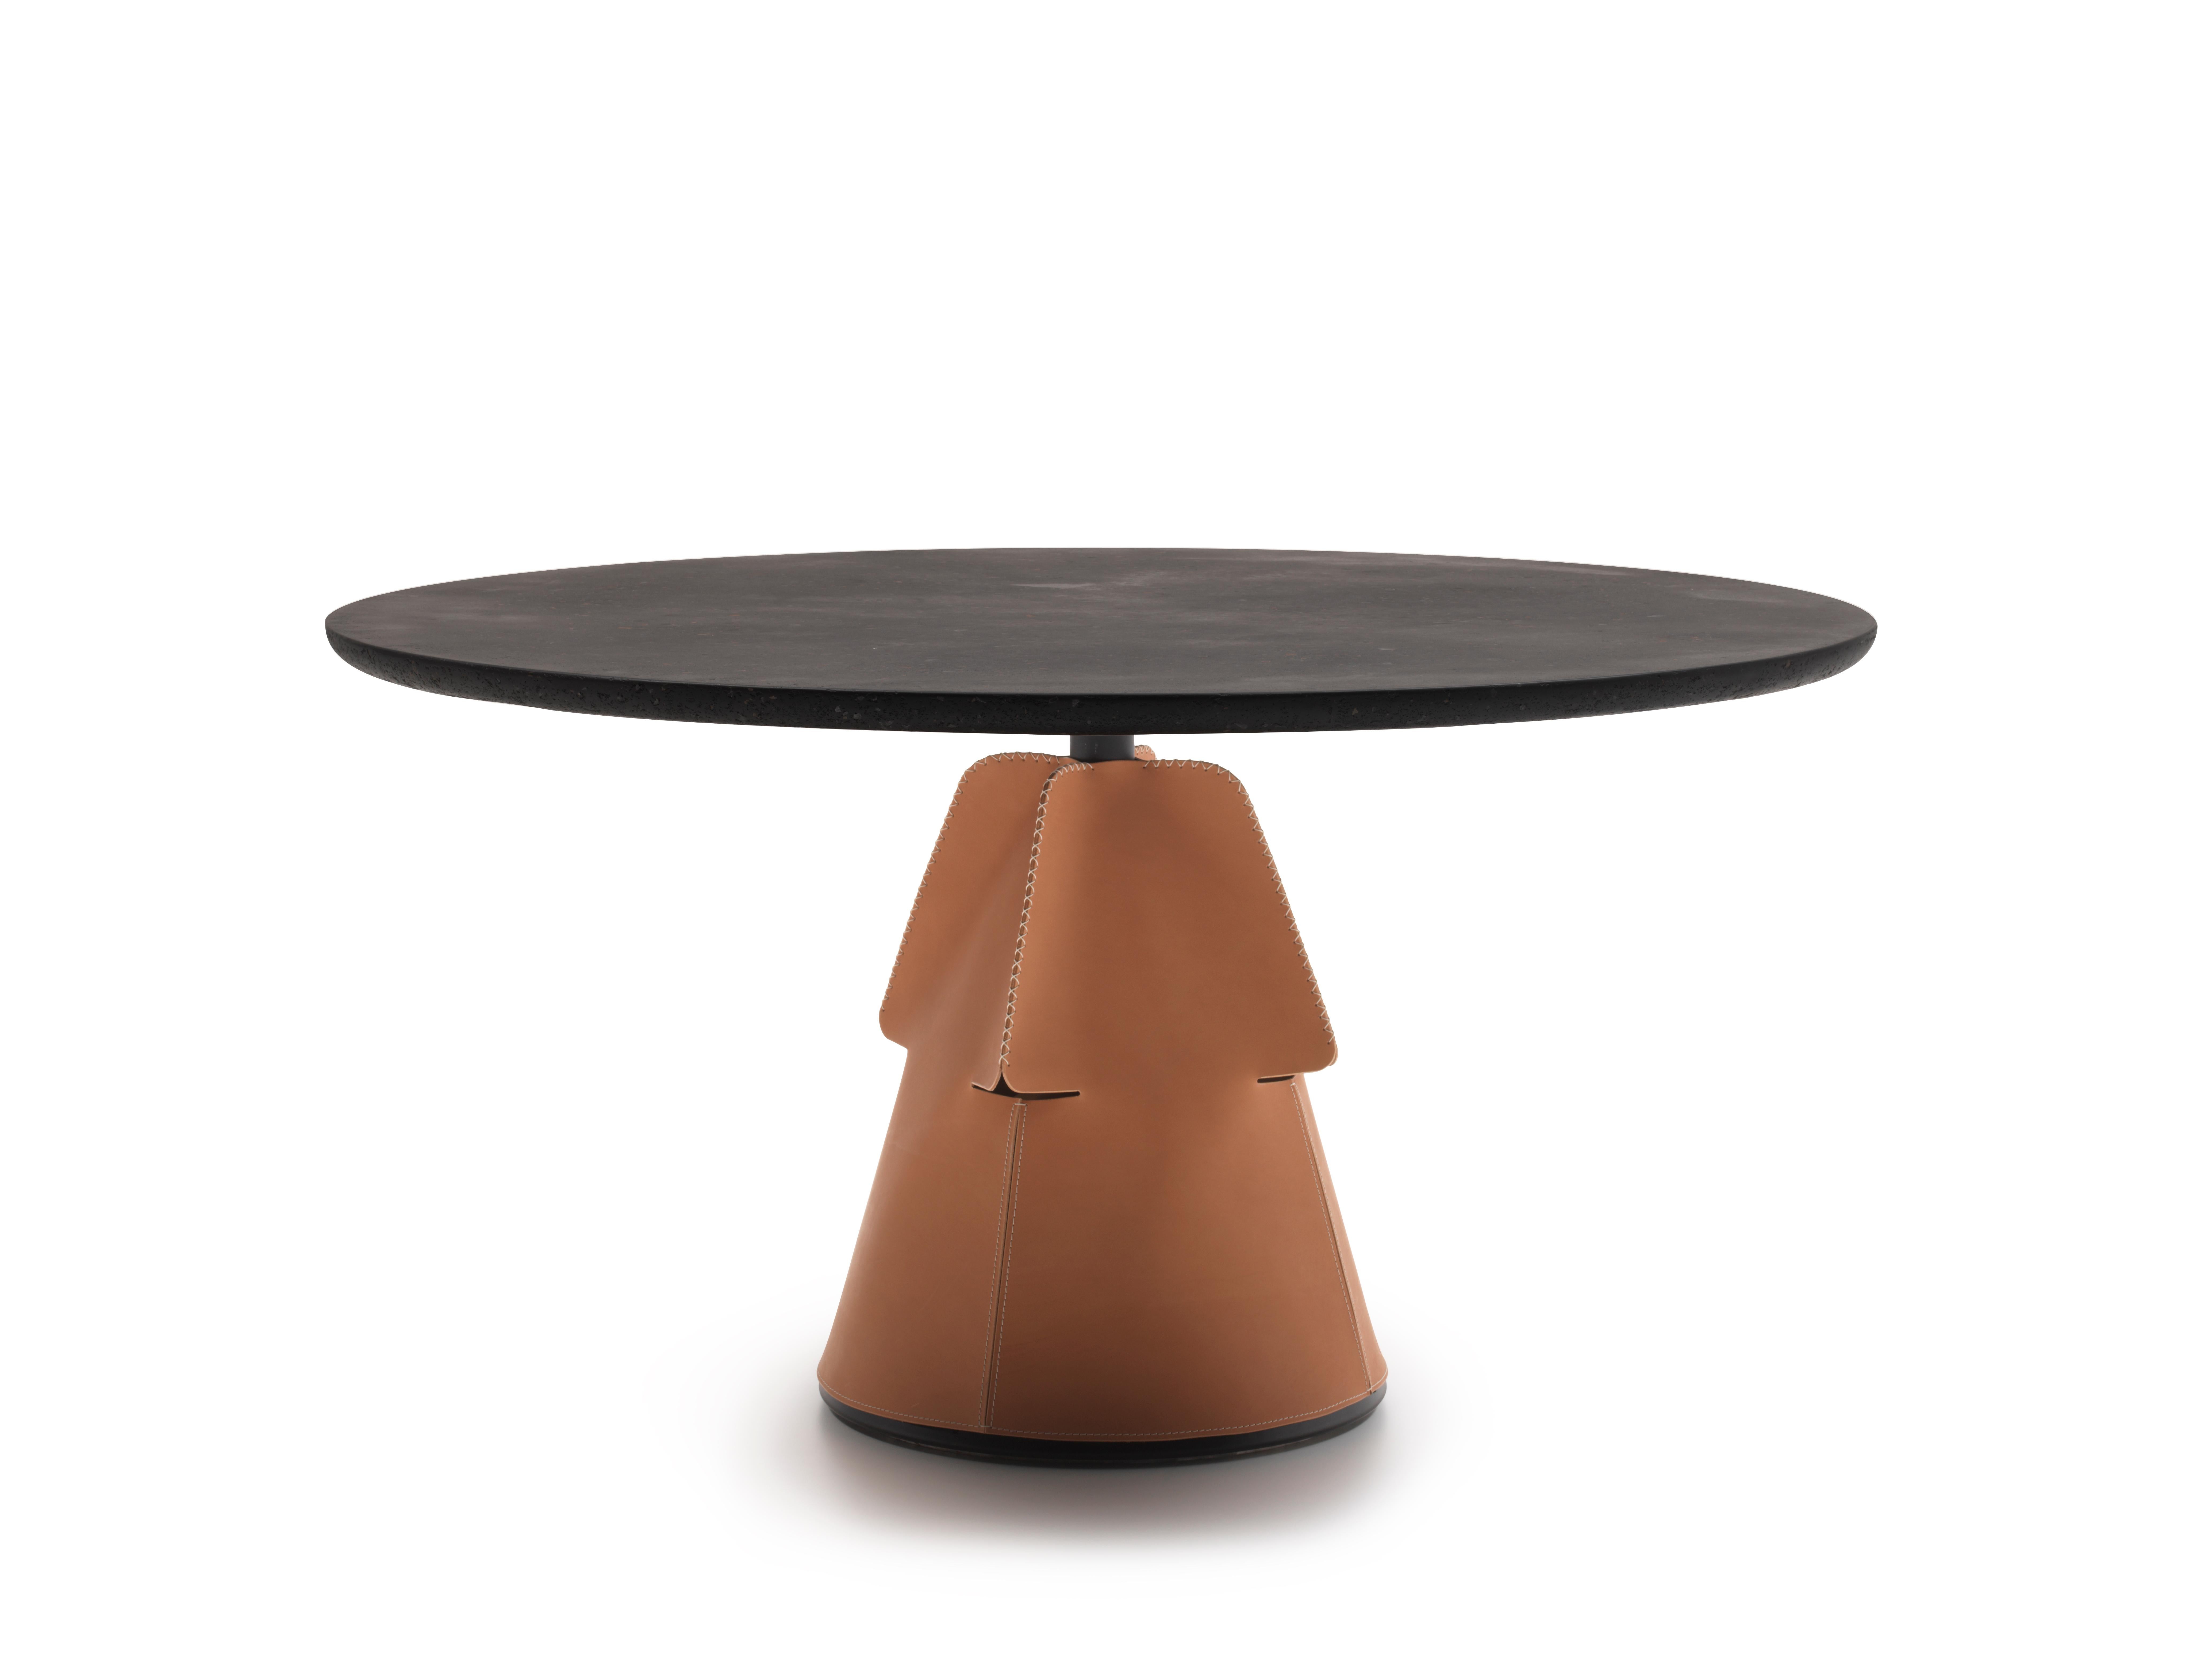 DS-615 coffee table by De Sede
Designer: Mario Ferrarini
Dimensions: 41 x 36 x 60 cm
Materials: Leather, stone or metal
Prices may change according to the chosen materials and size. 

One of the great passions of their master craftsmen is to